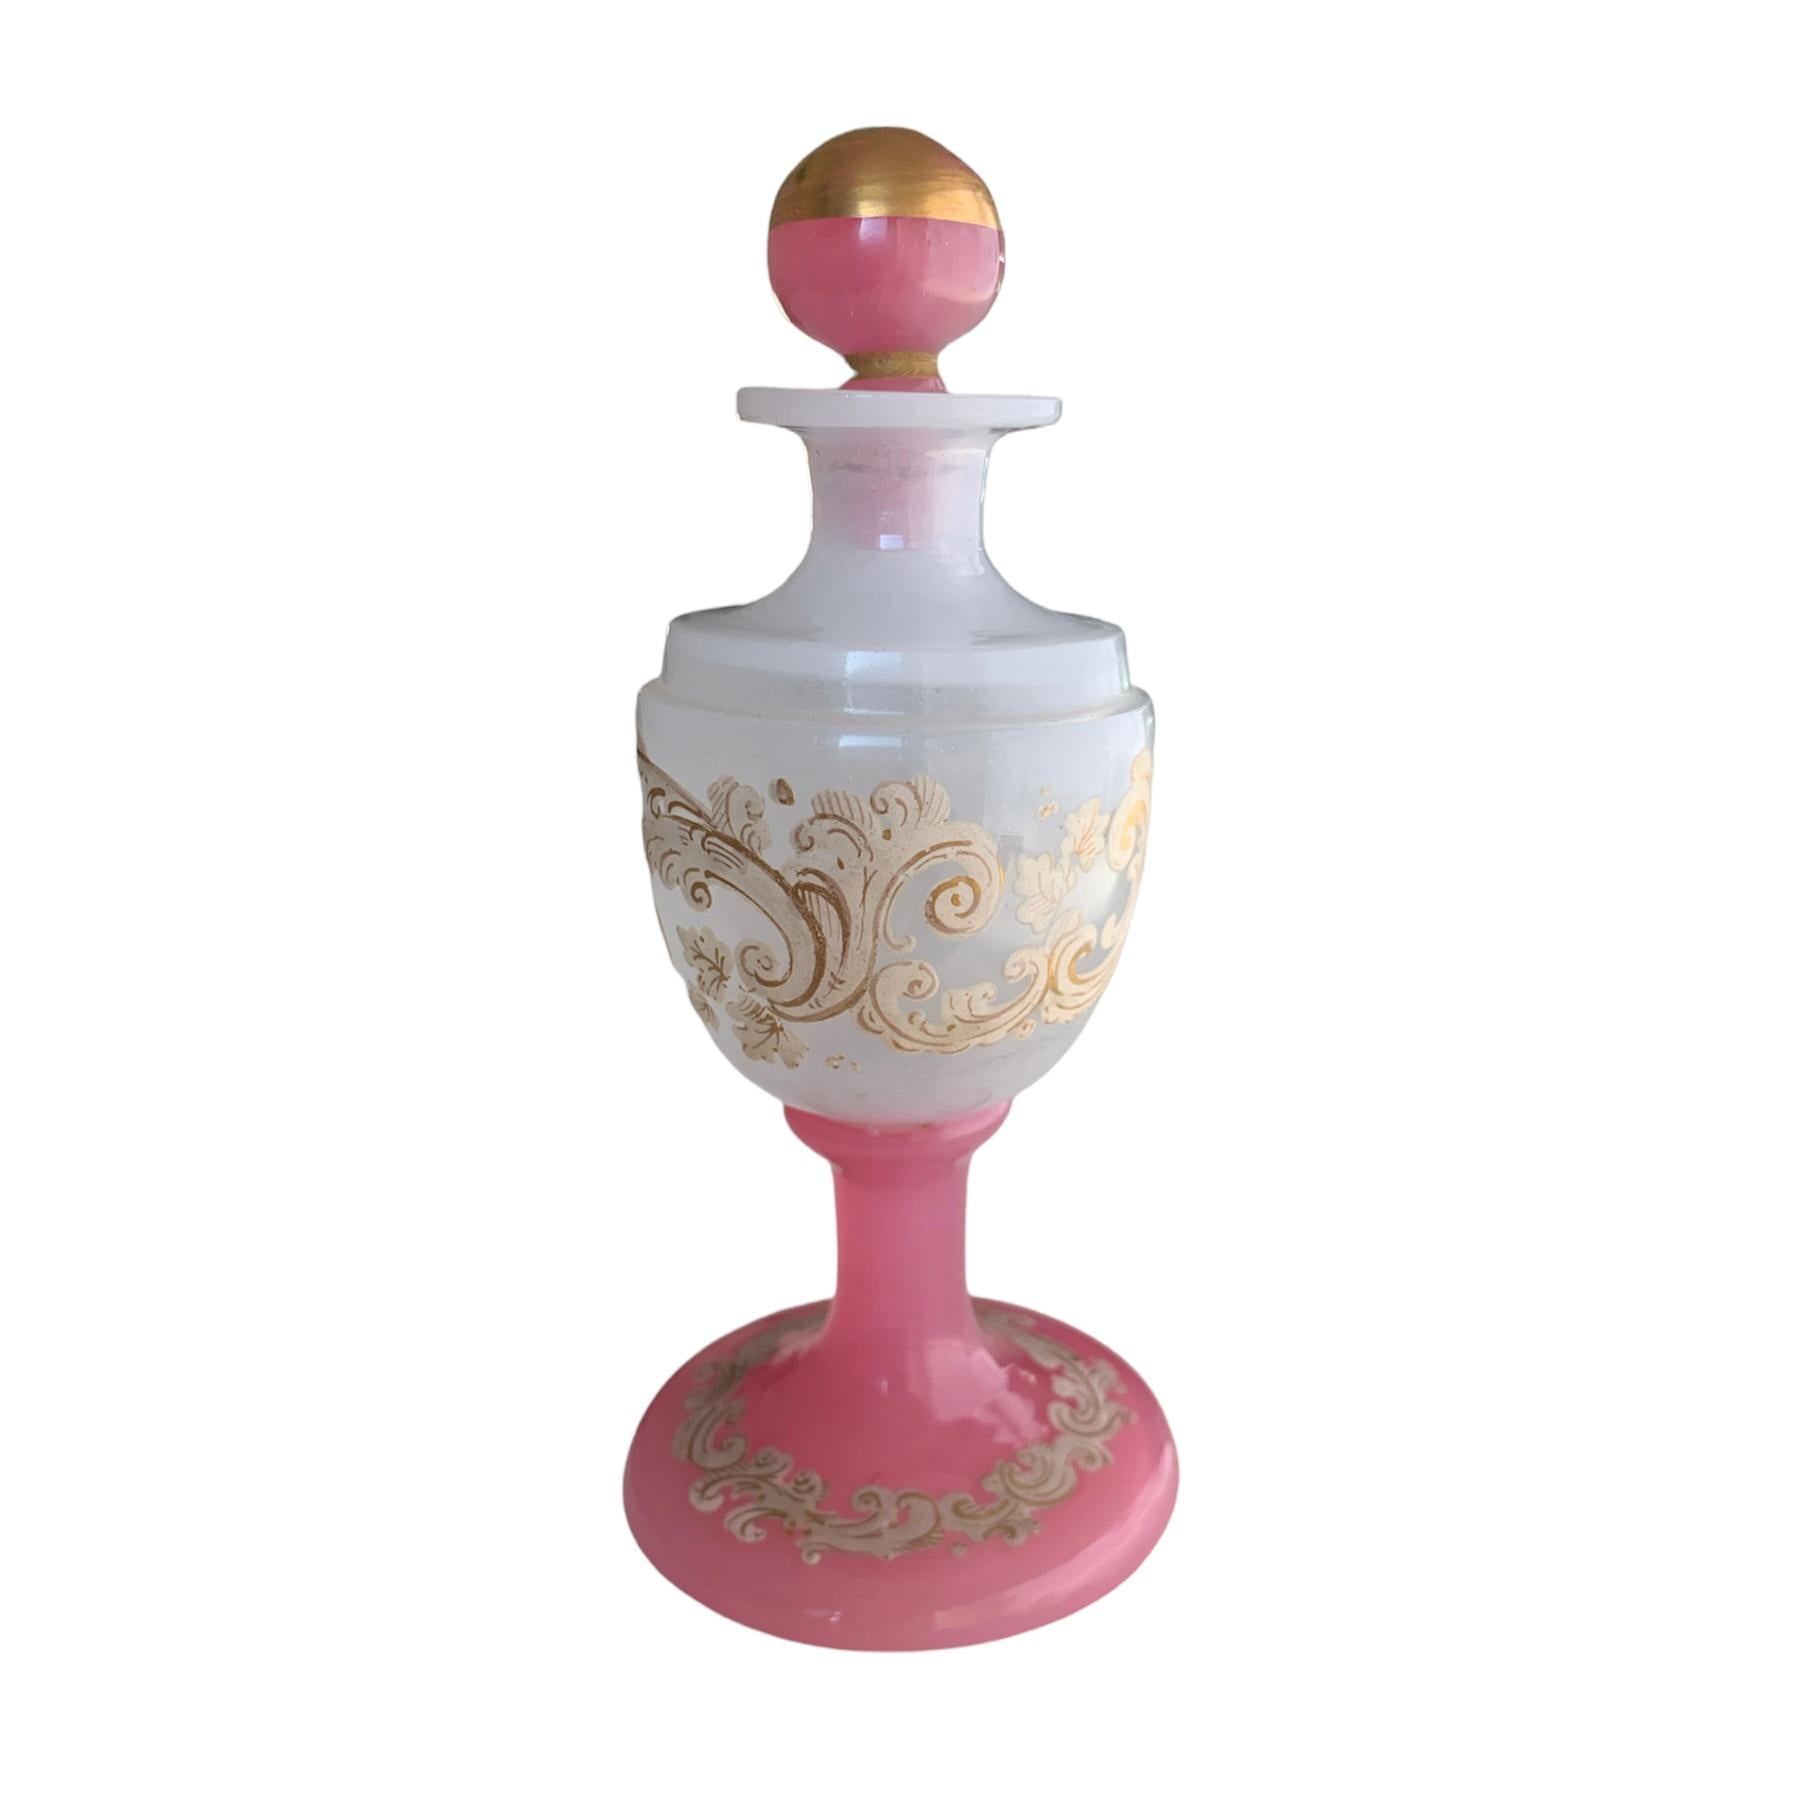 High quality perfume bottle and stopper made of two-colored opal glass with gilded enamel decoration, the milky white circular body features continuous scrollwork enameling, set on a spreading pink foot with further enamel-decoration forming a